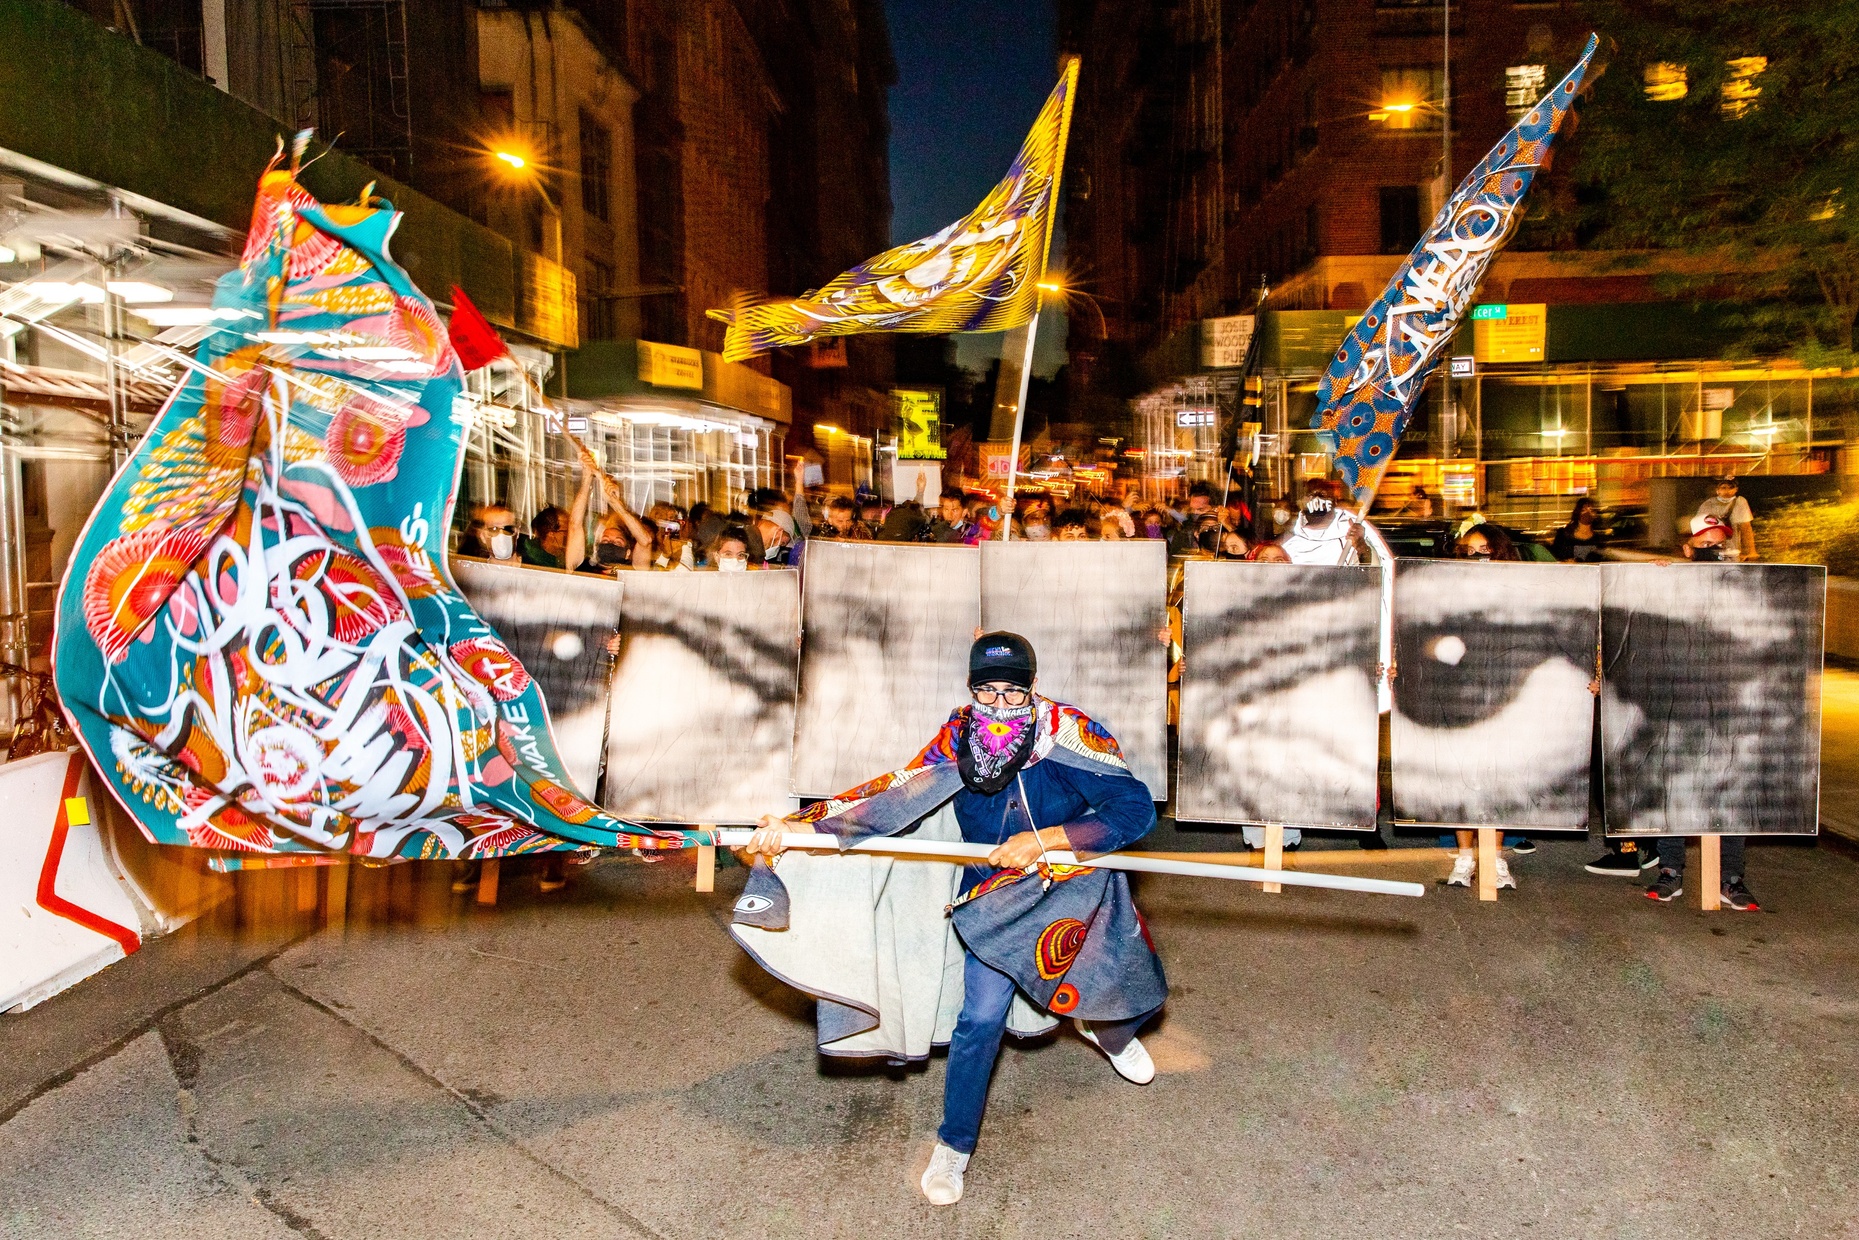 A photograph of a person in the street at night, waving a colorful flag. Behind them is an out of focus crowd and a banner with a photograph of eyes.